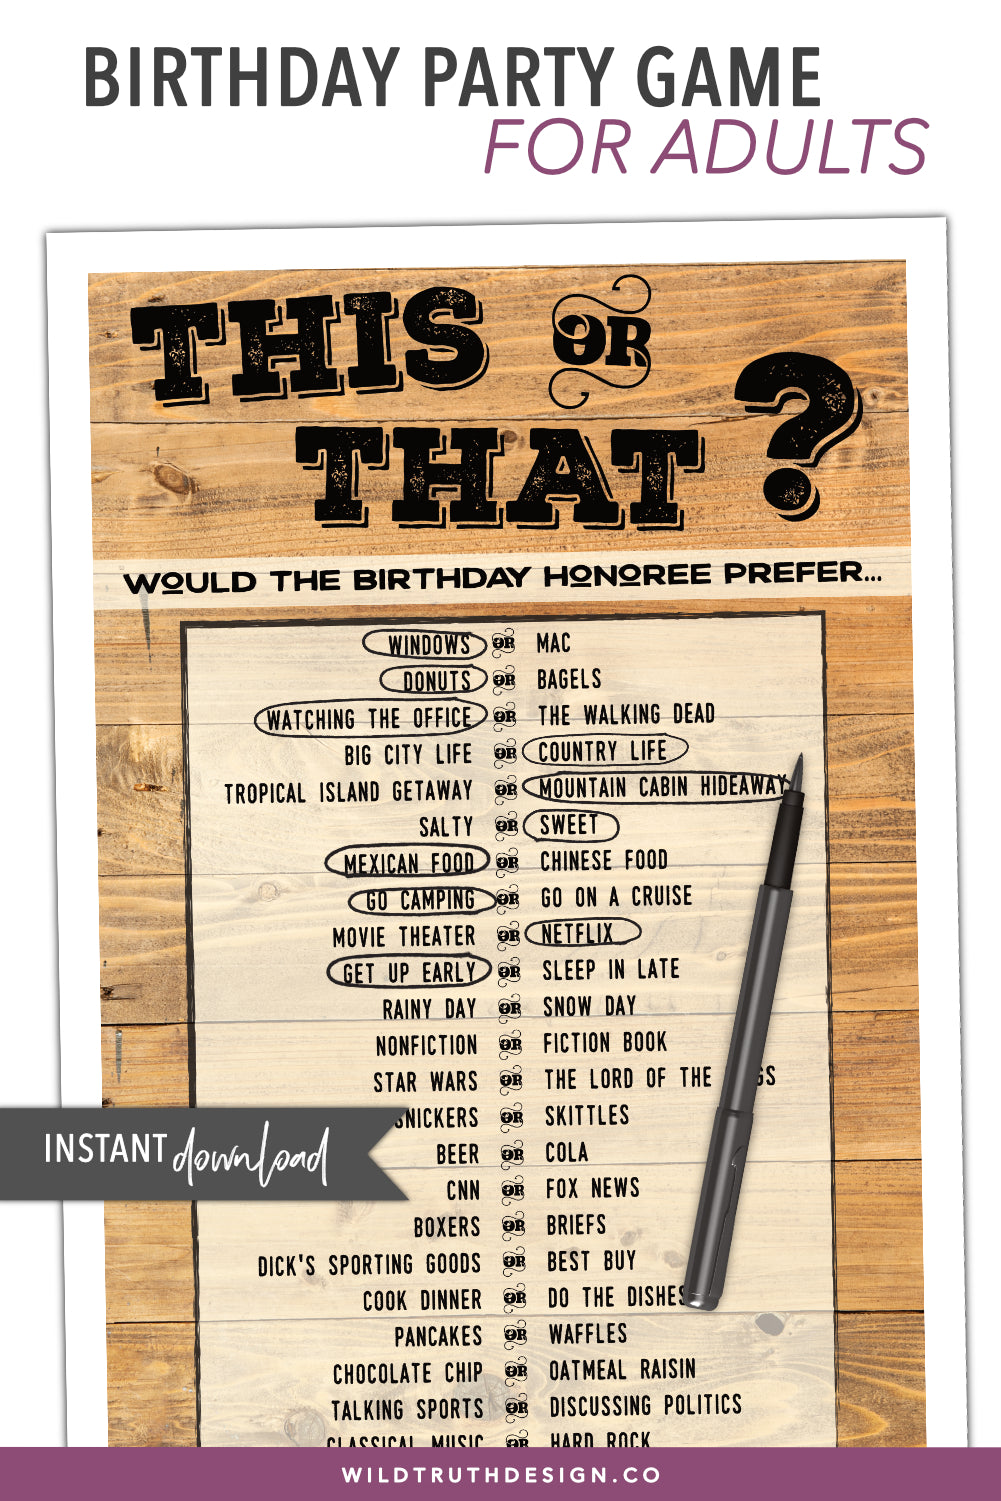 This or That? Gender Neutral Birthday Game For Adults